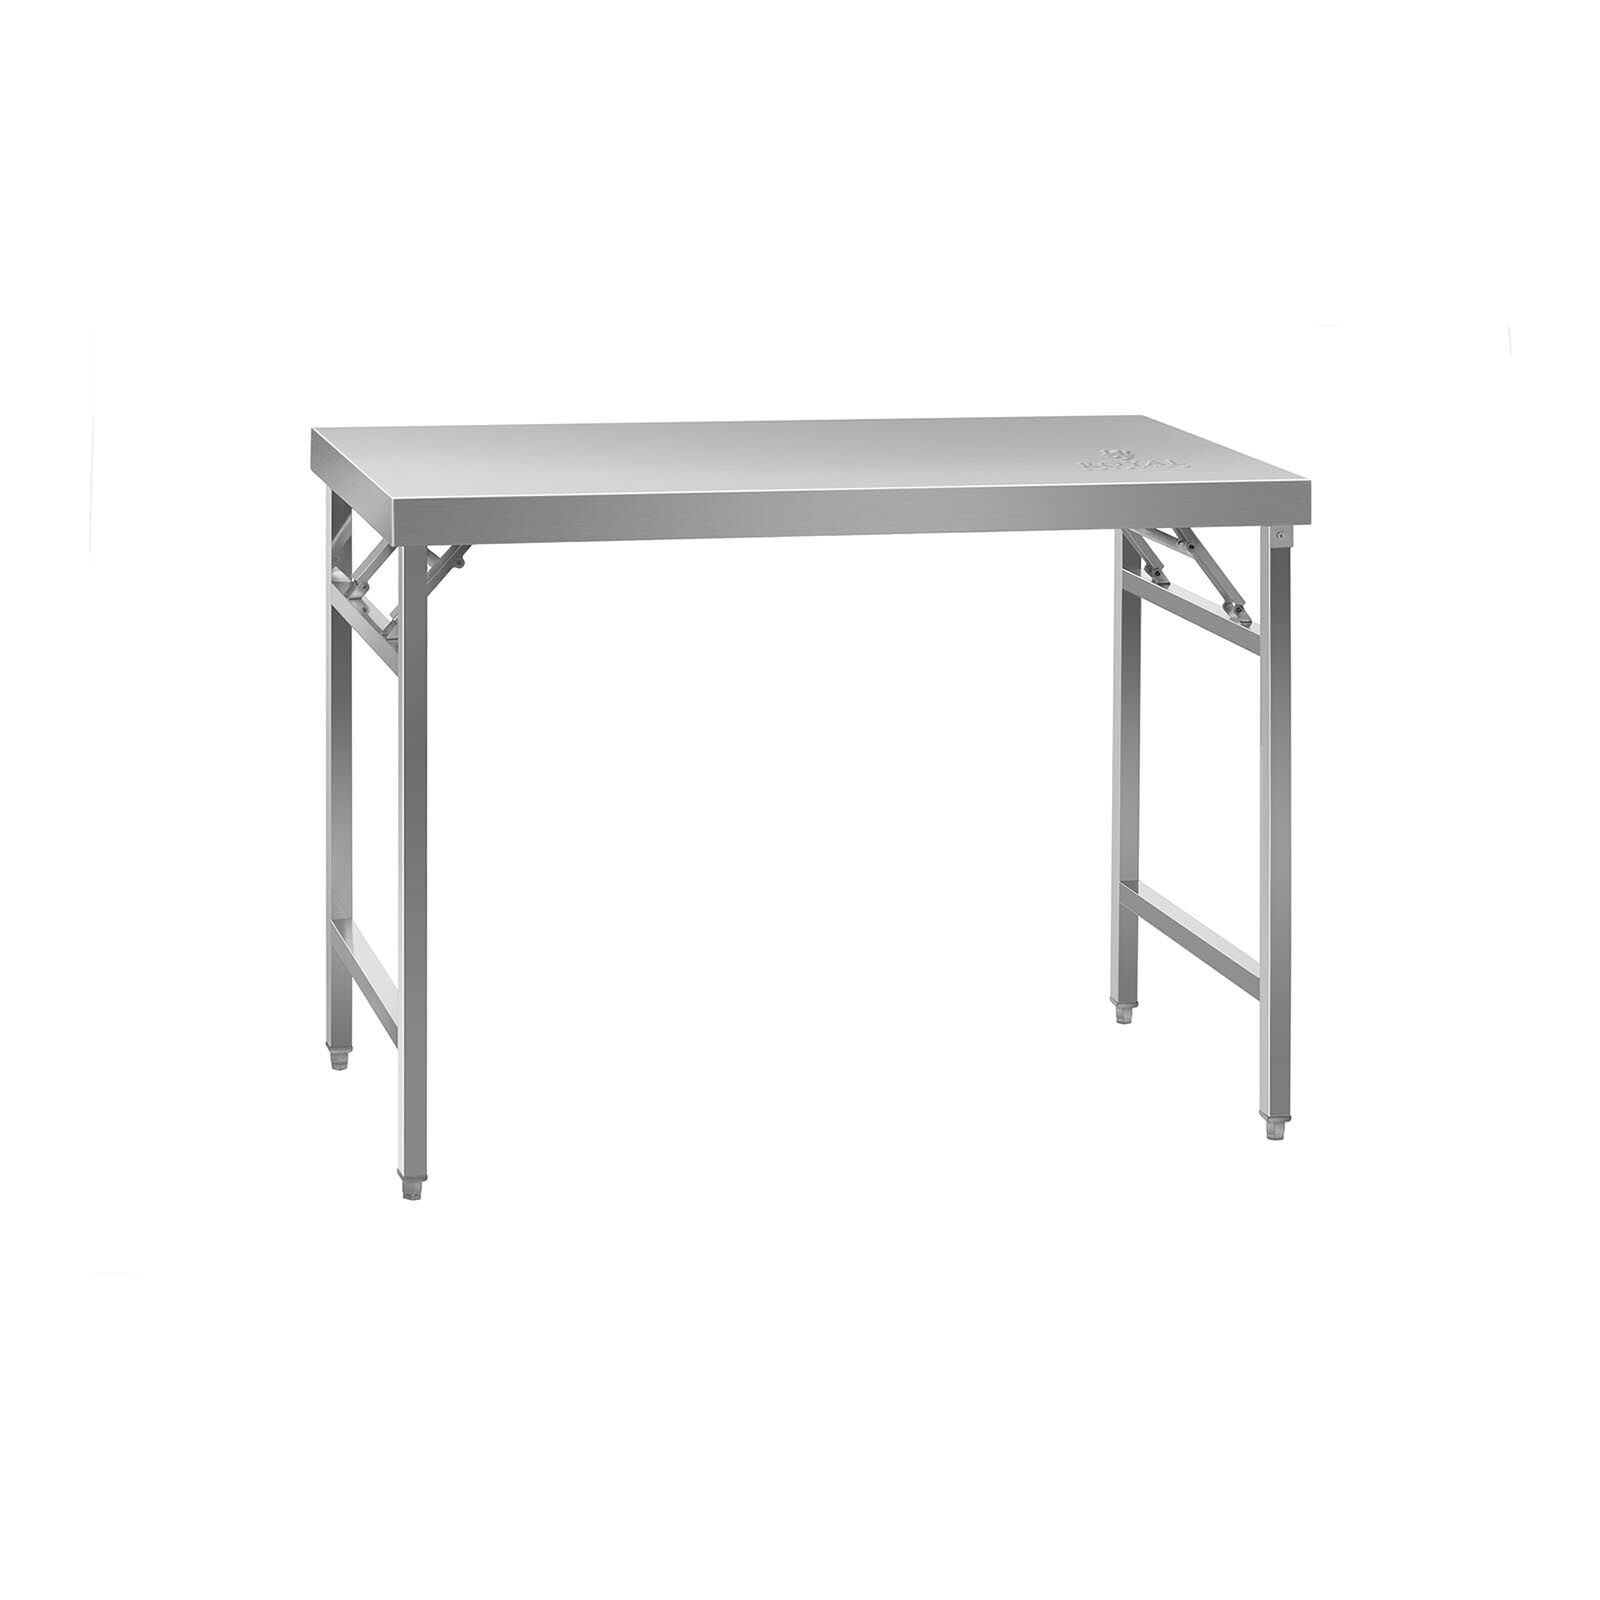 Royal Catering Folding Work Table - Stainless Steel - 120 x 60 cm 10010738